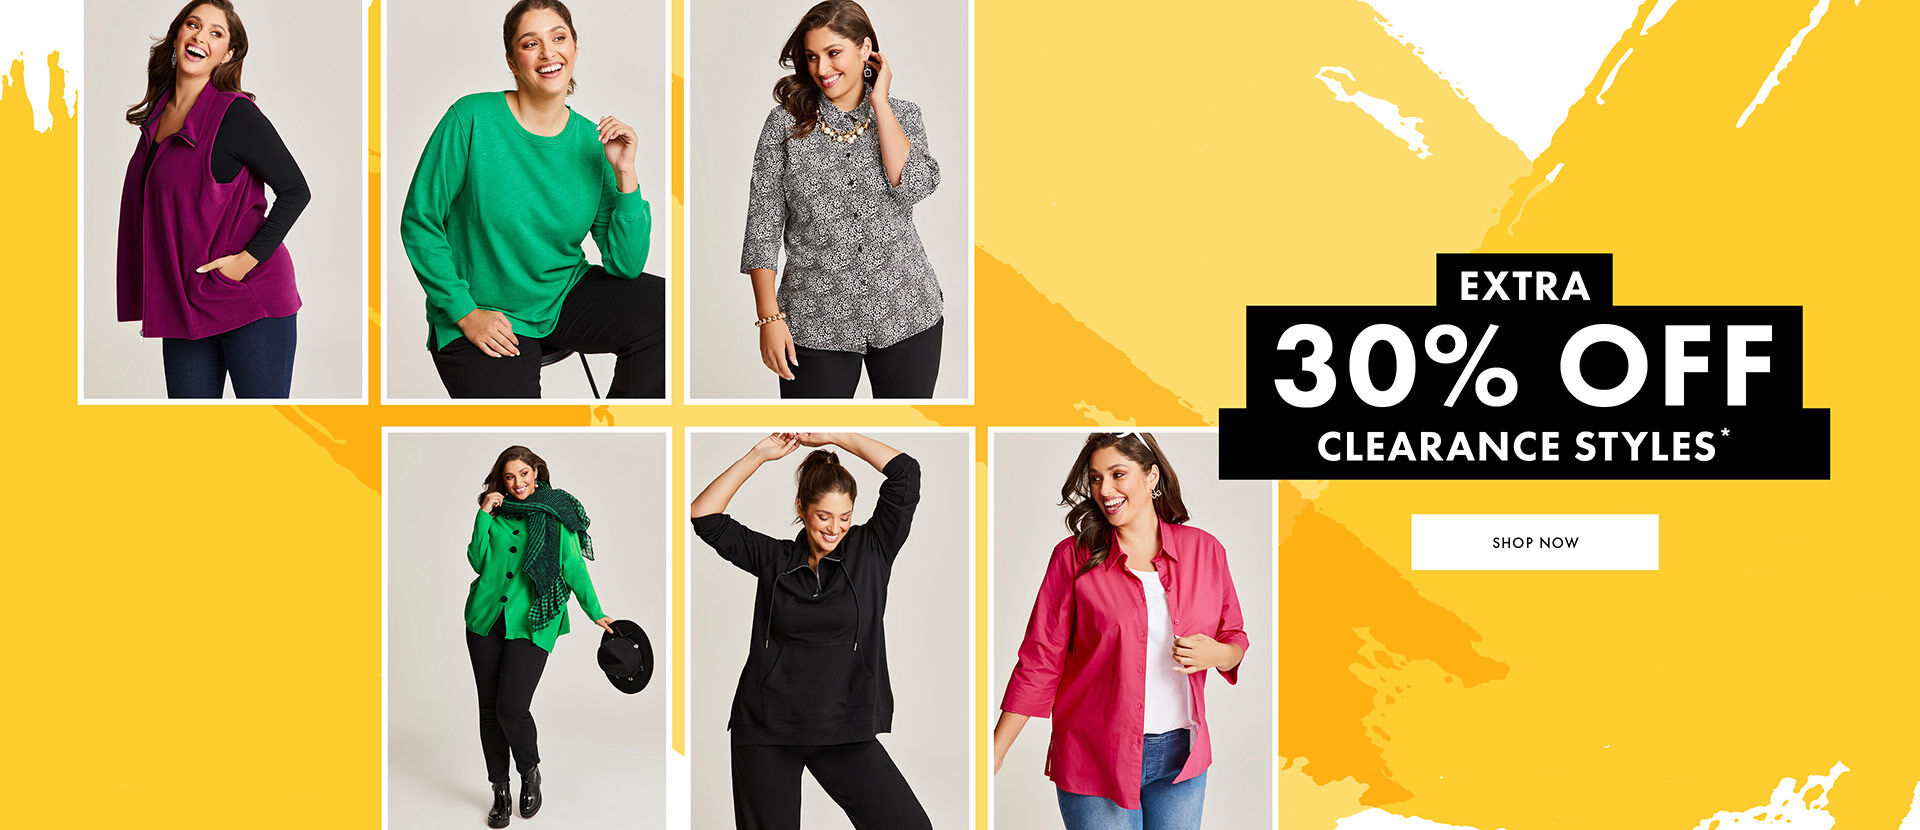 Extra 30% off Clearance Styles*